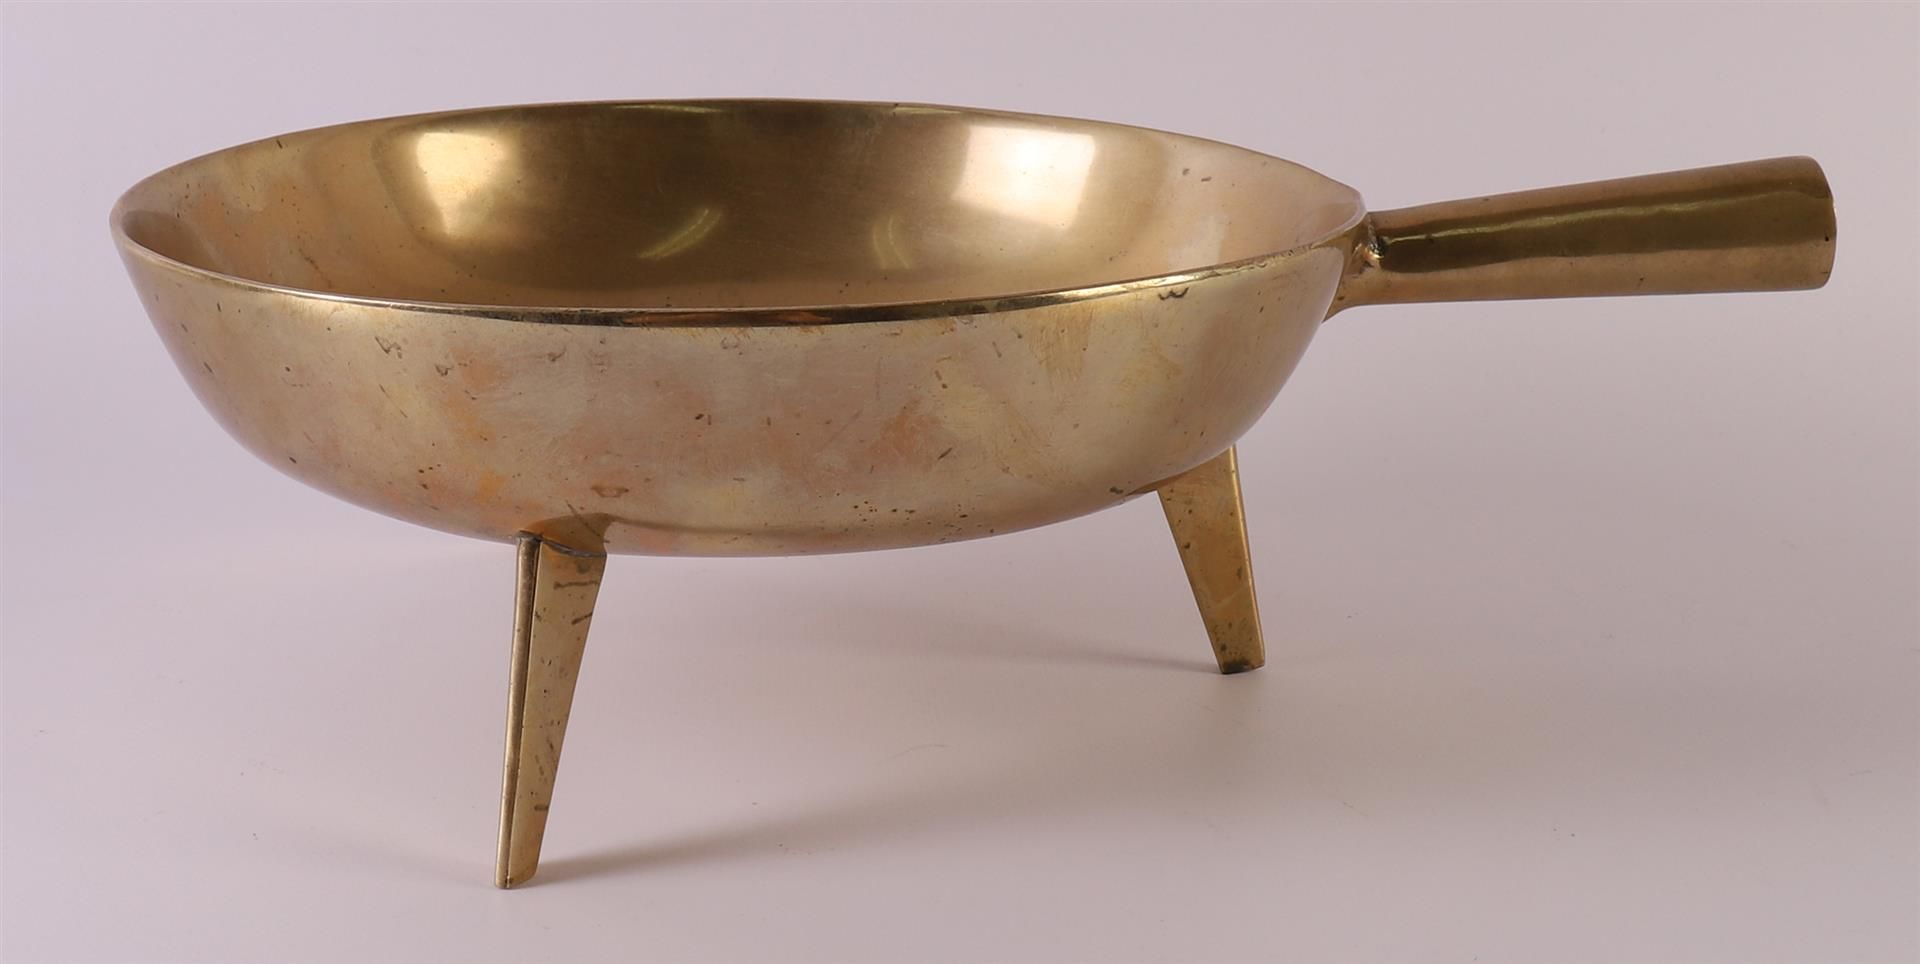 A bronze pan on tripod, 18th century, h 10 x Ø 24 cm (without stem). Here is a cast iron coal - Image 2 of 7